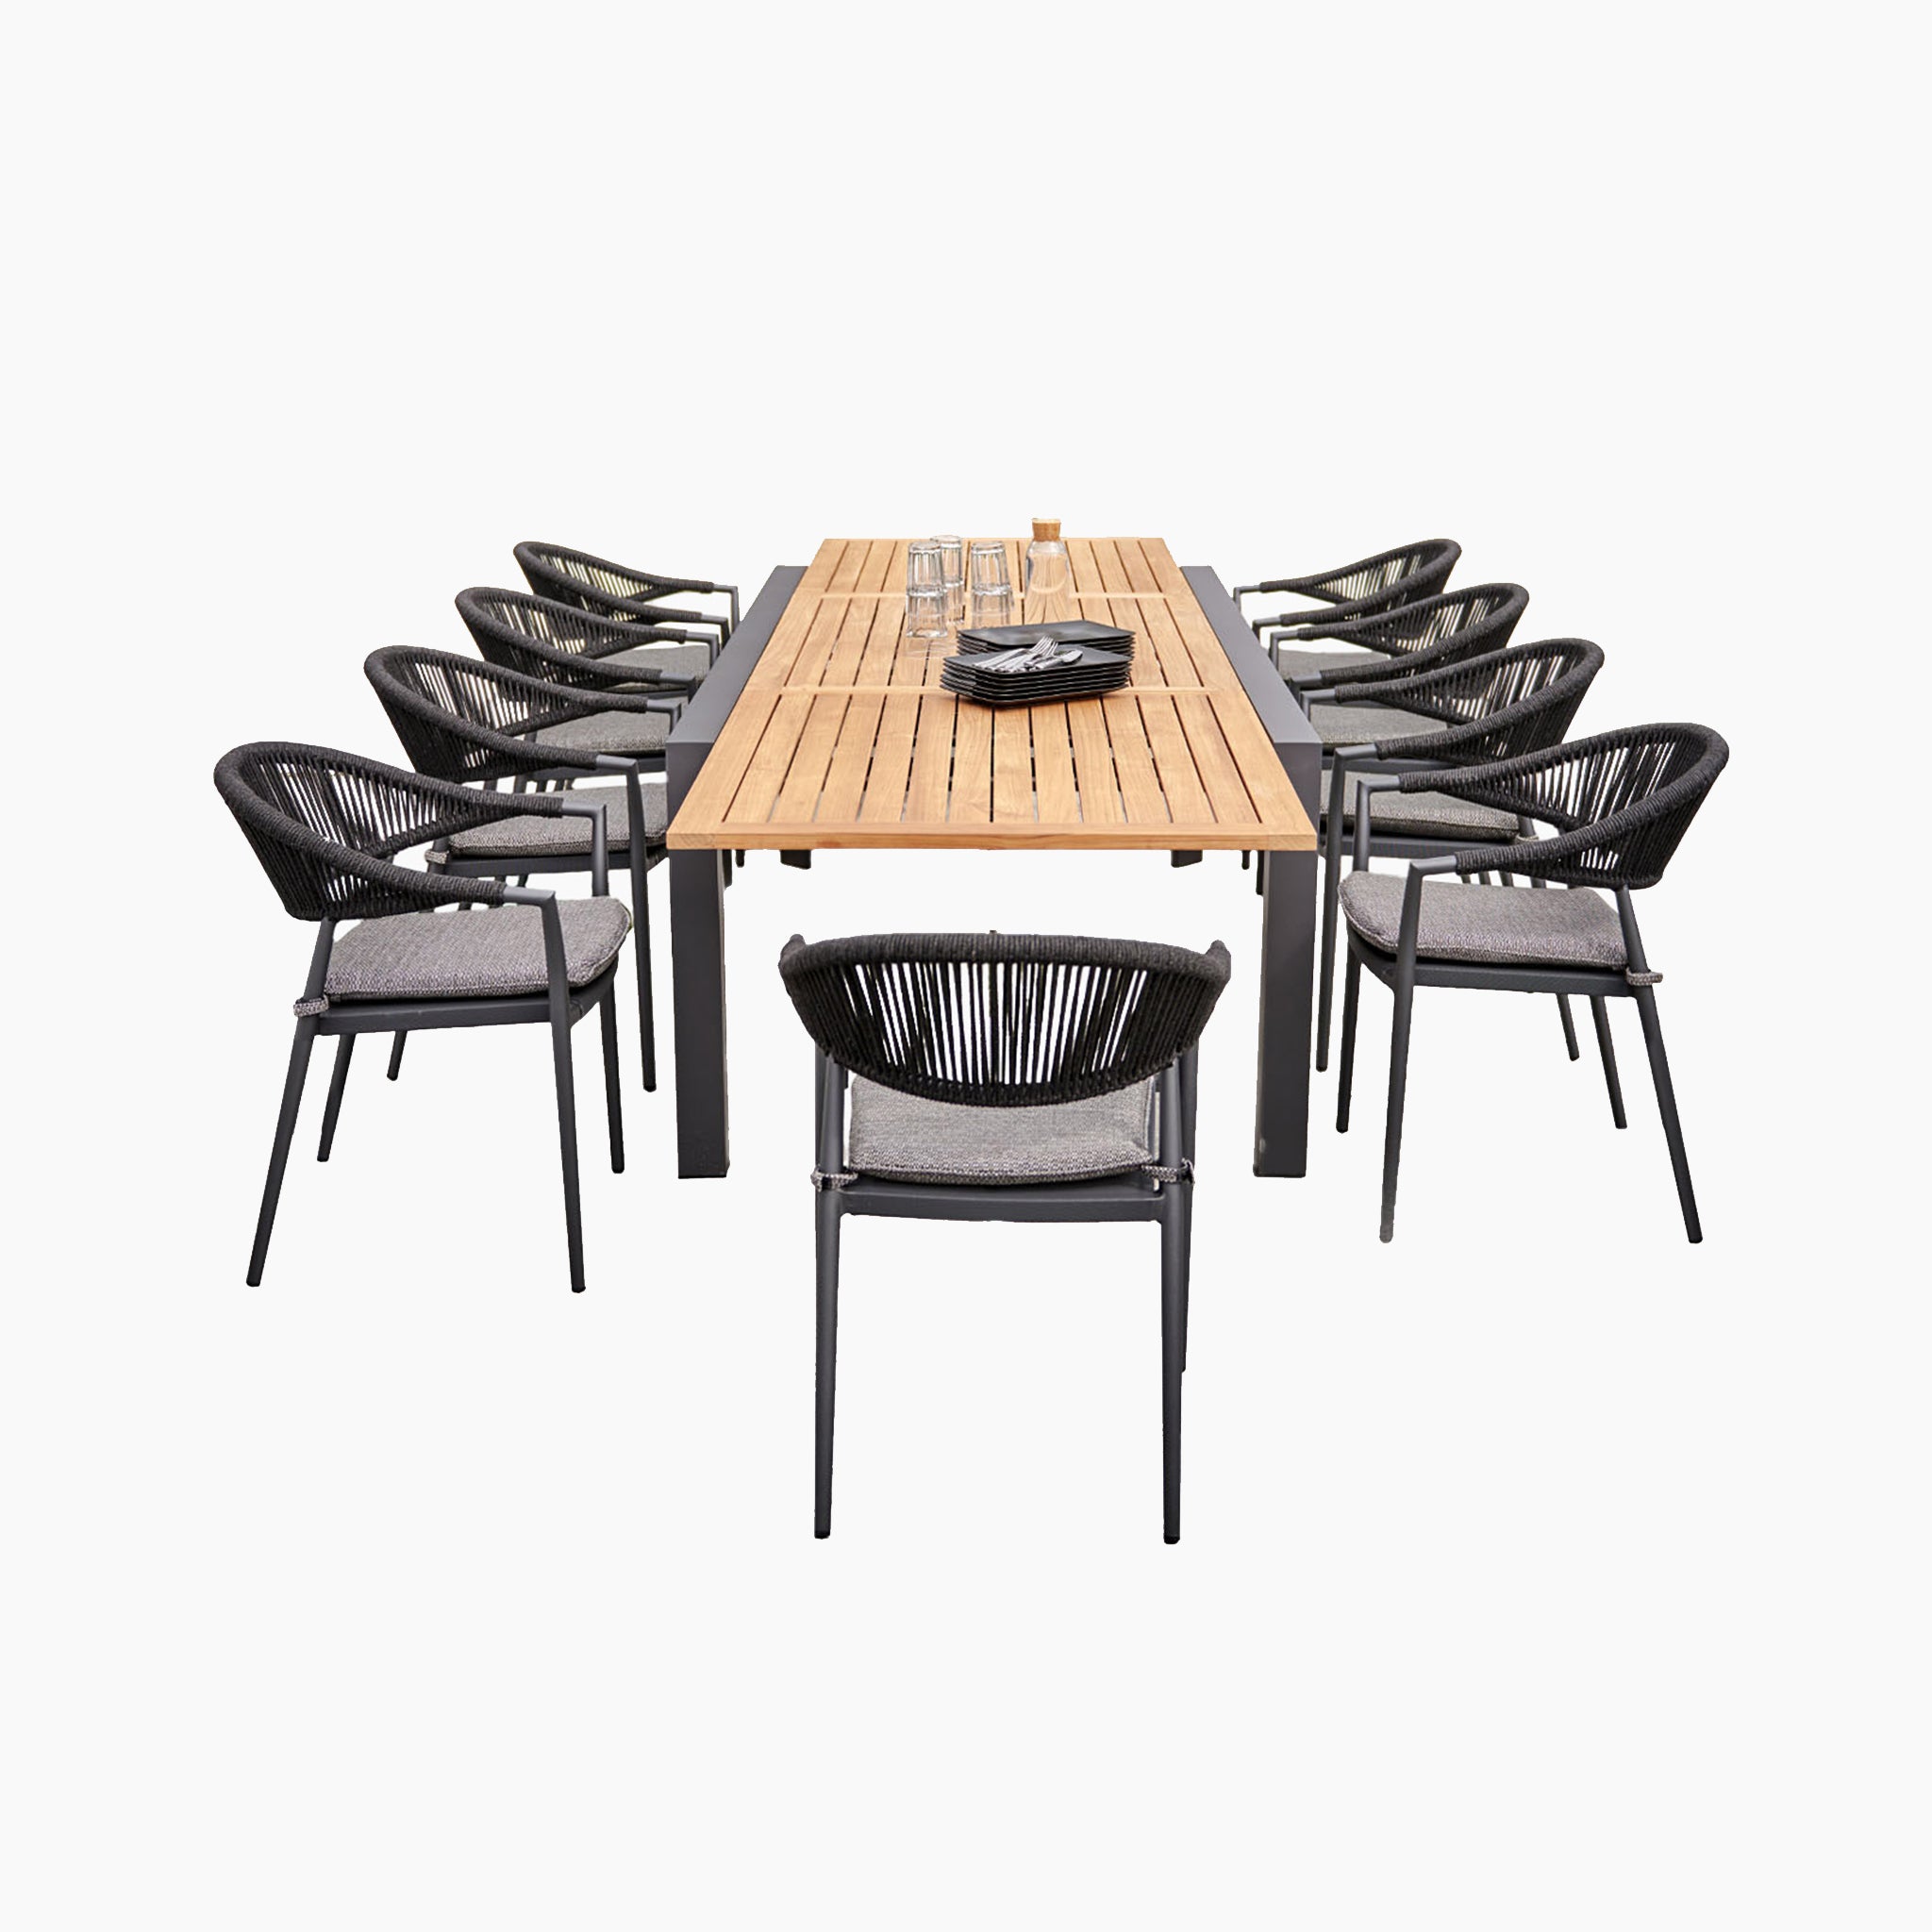 Cloverly 10 Seat Rectangular Extending Dining Set with Teak Table in Charcoal